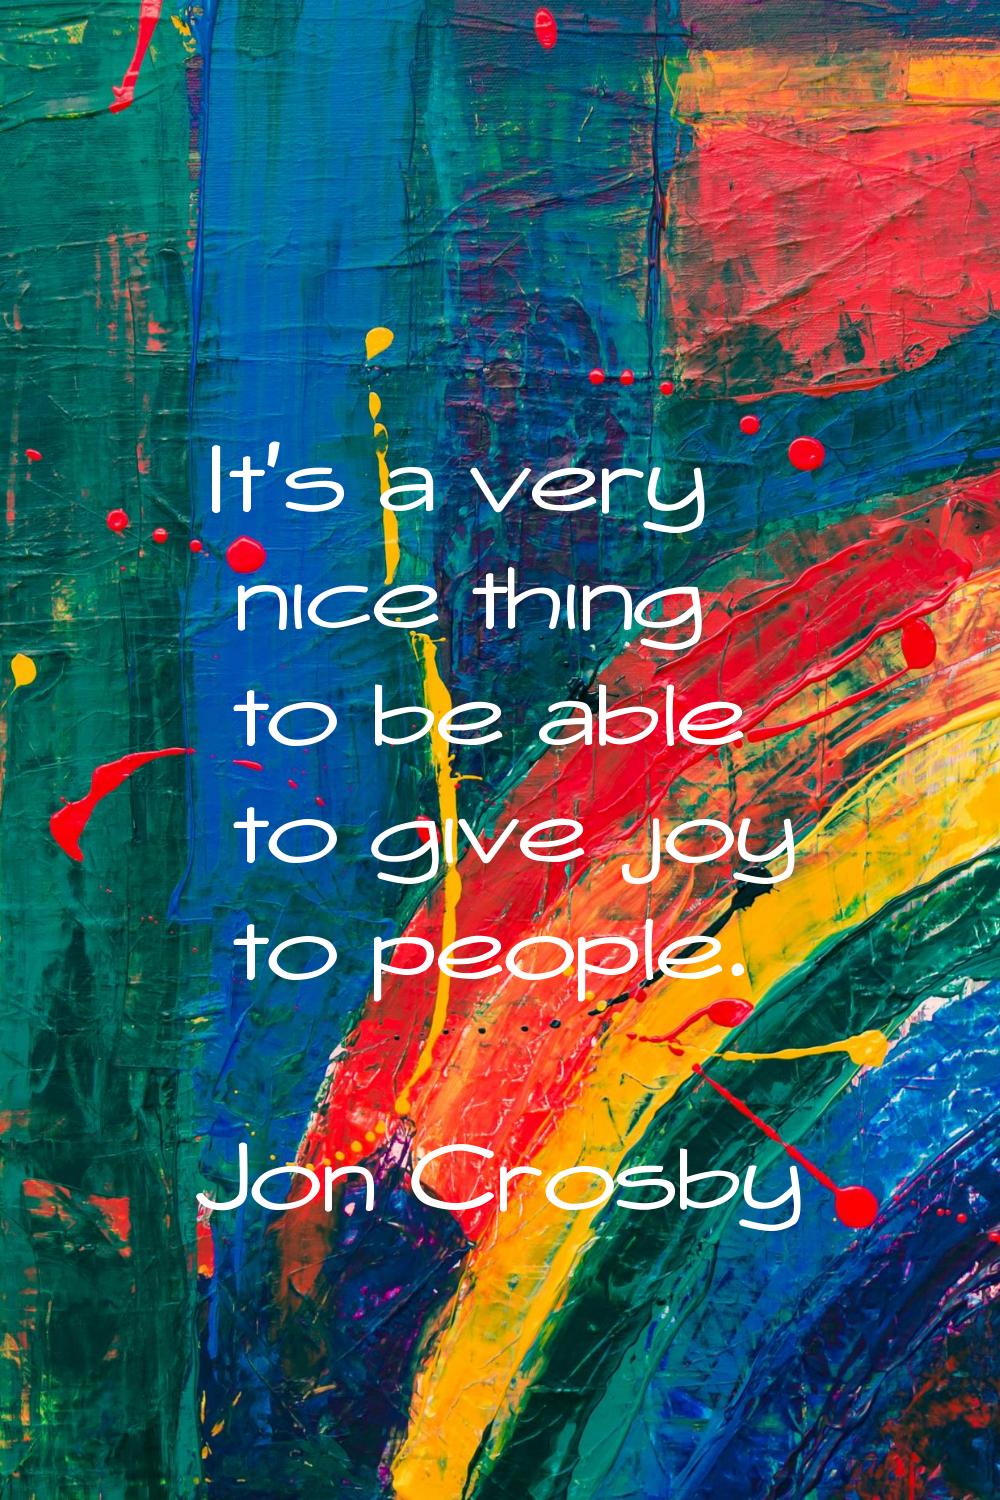 It's a very nice thing to be able to give joy to people.